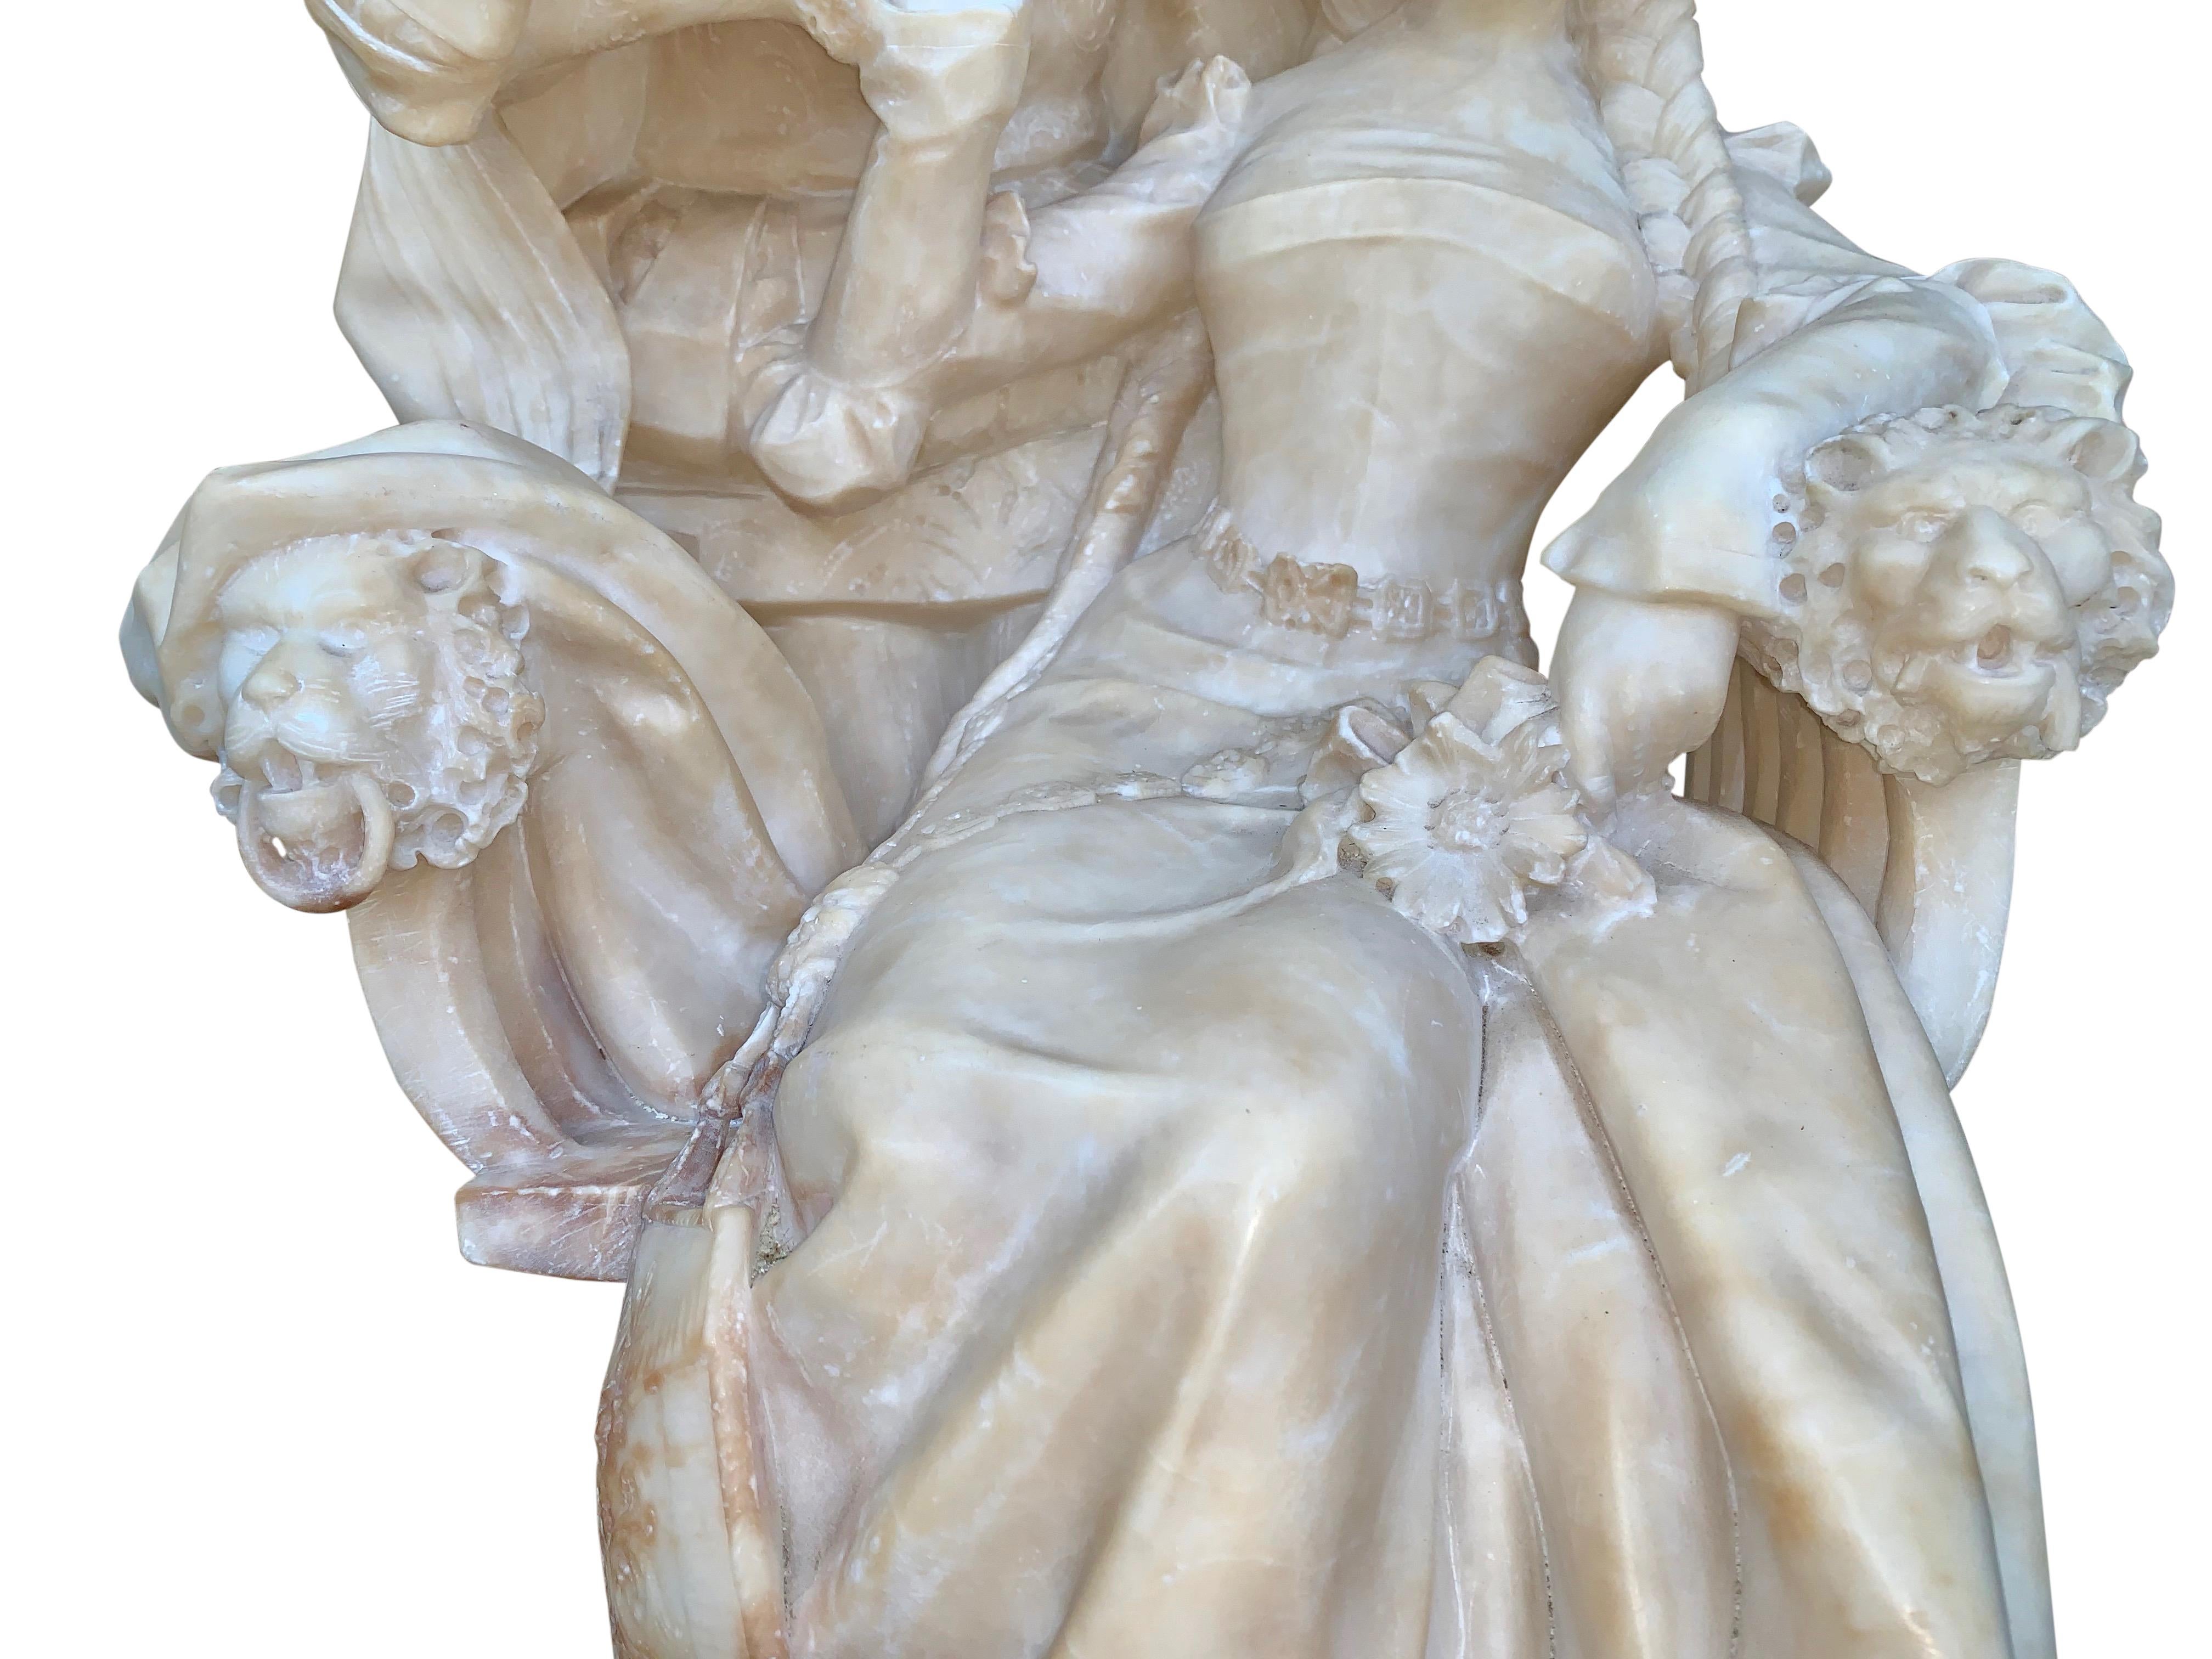 Alabaster Group of a Cavalier and Lady with Pedestal For Sale 11